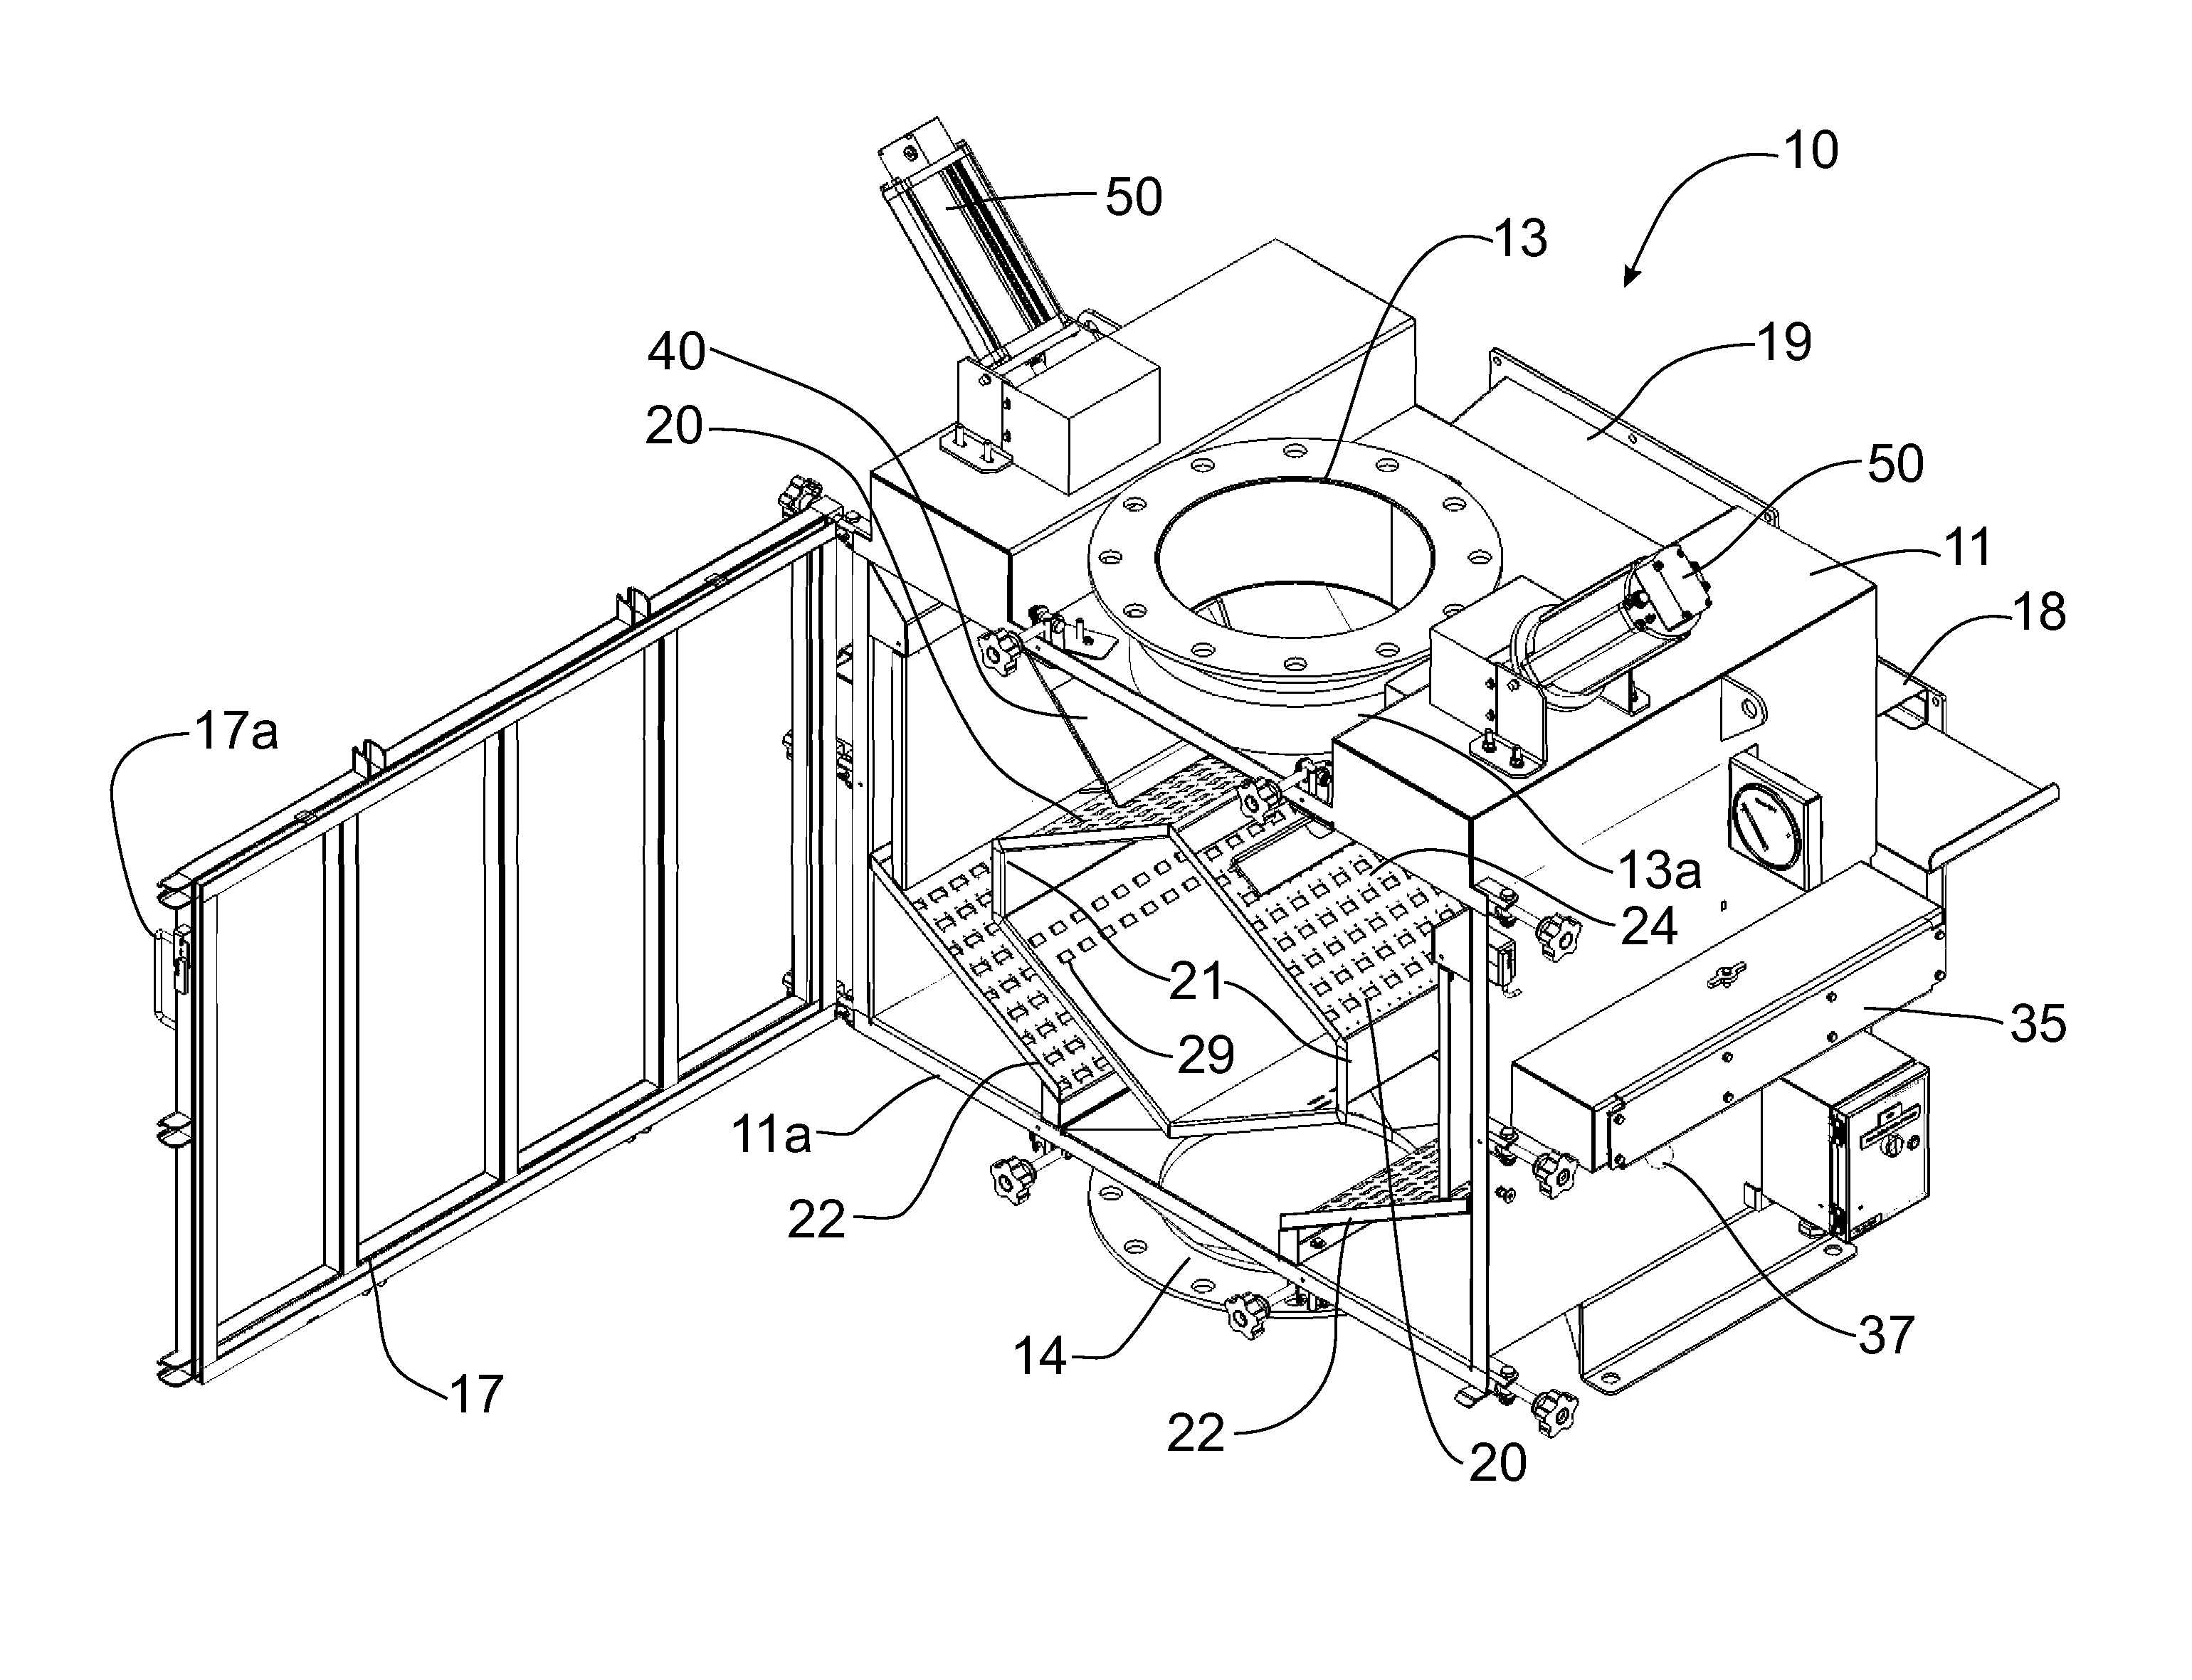 Dedusting Apparatus Having Actuator Controlled Inlet Deflectors to Provide Adjustable Product Flow Regulation